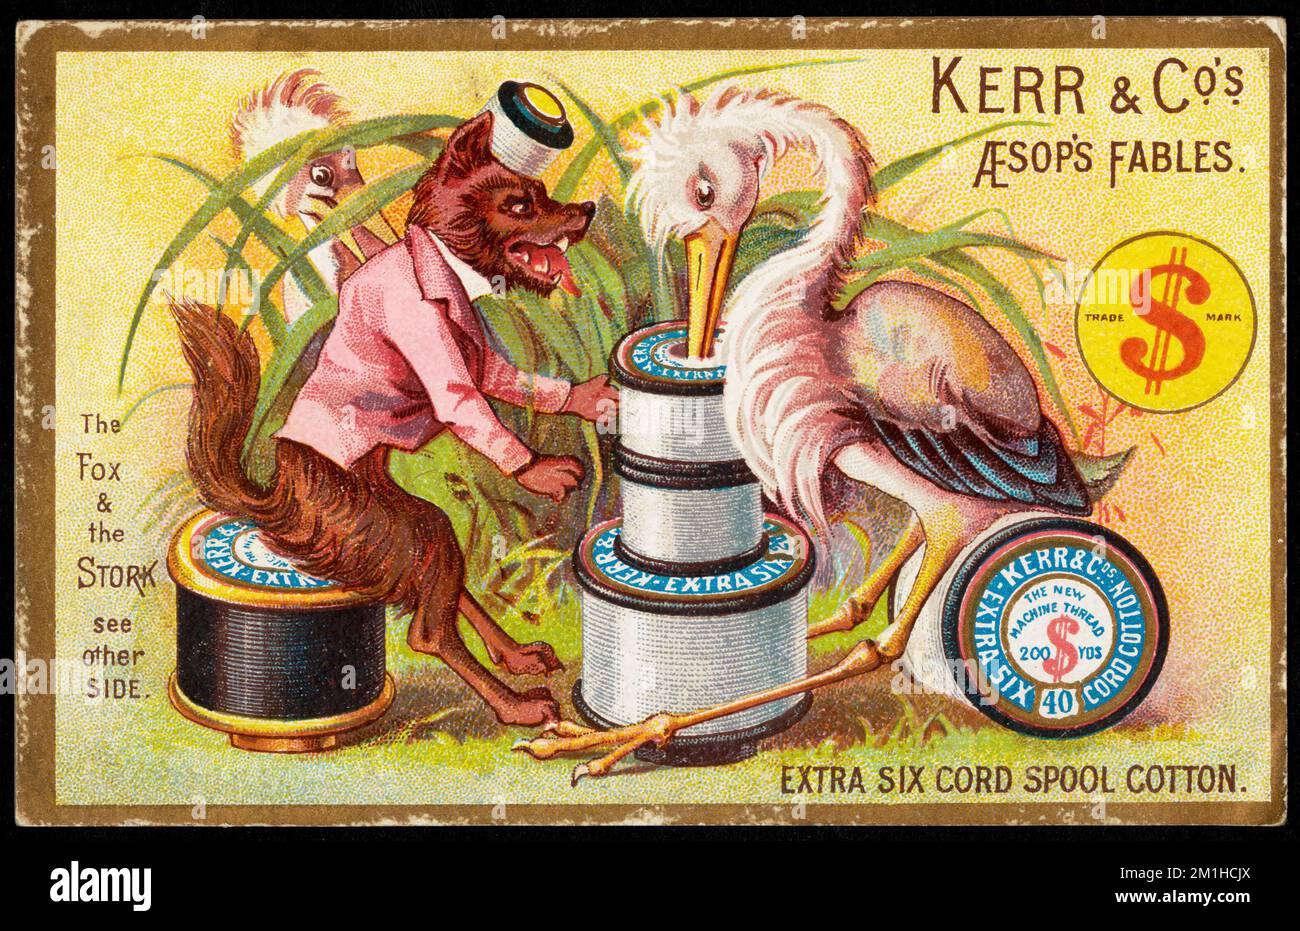 Kerr & Co's Aesop's fables. The fox & the stork, see other side, extra six cord spool cotton. , Foxes, Storks, Thread, Cotton, 19th Century American Trade Cards Stock Photo